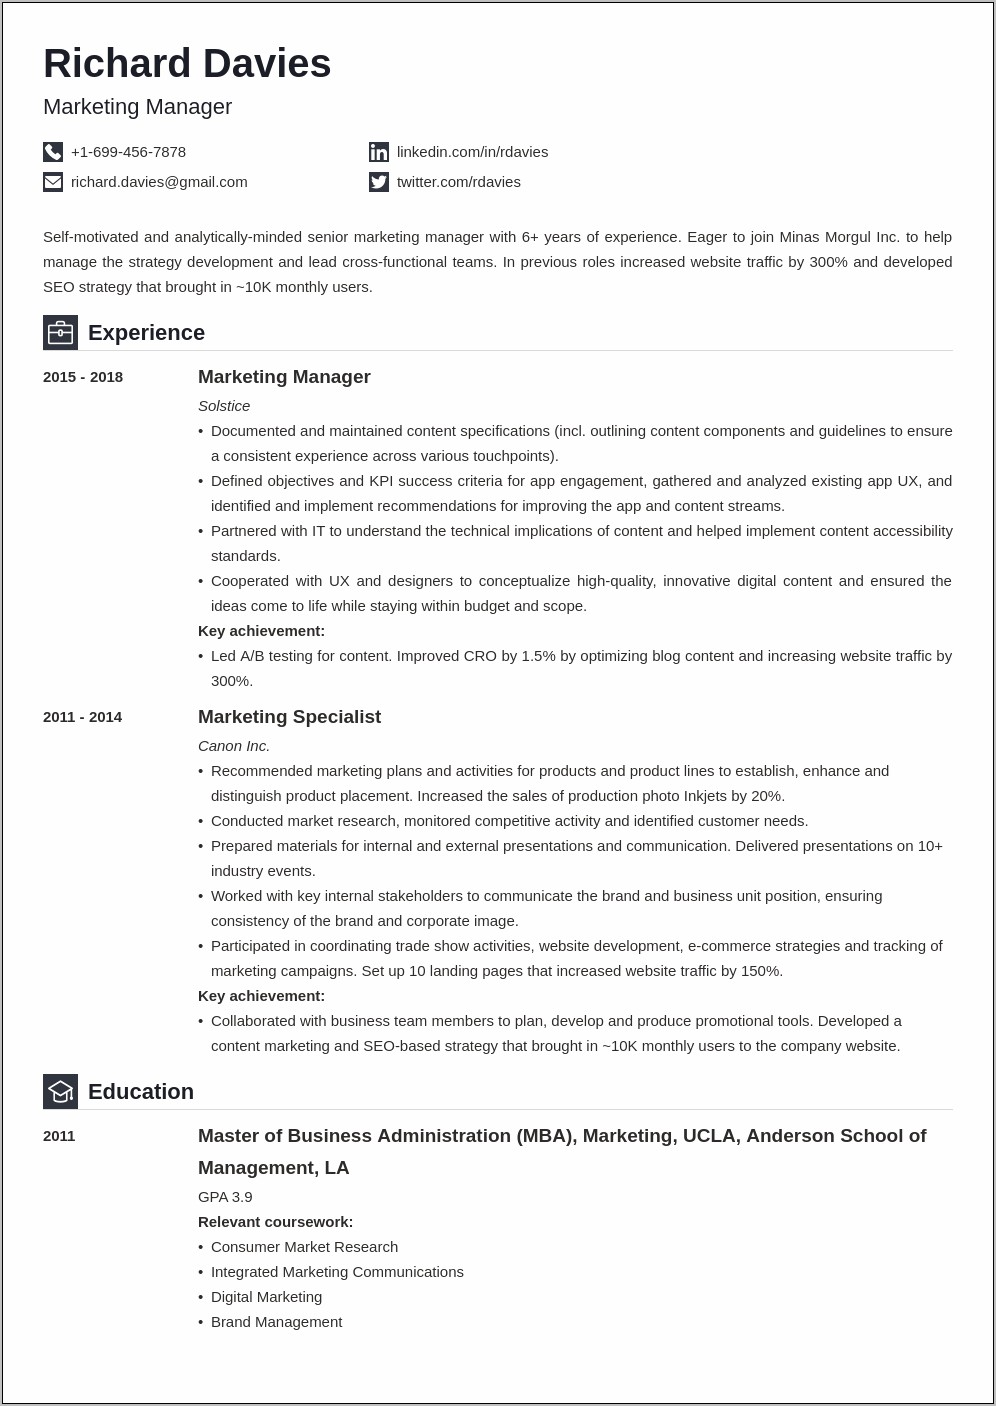 Sample Of Resumes To Include In Marketing Materials